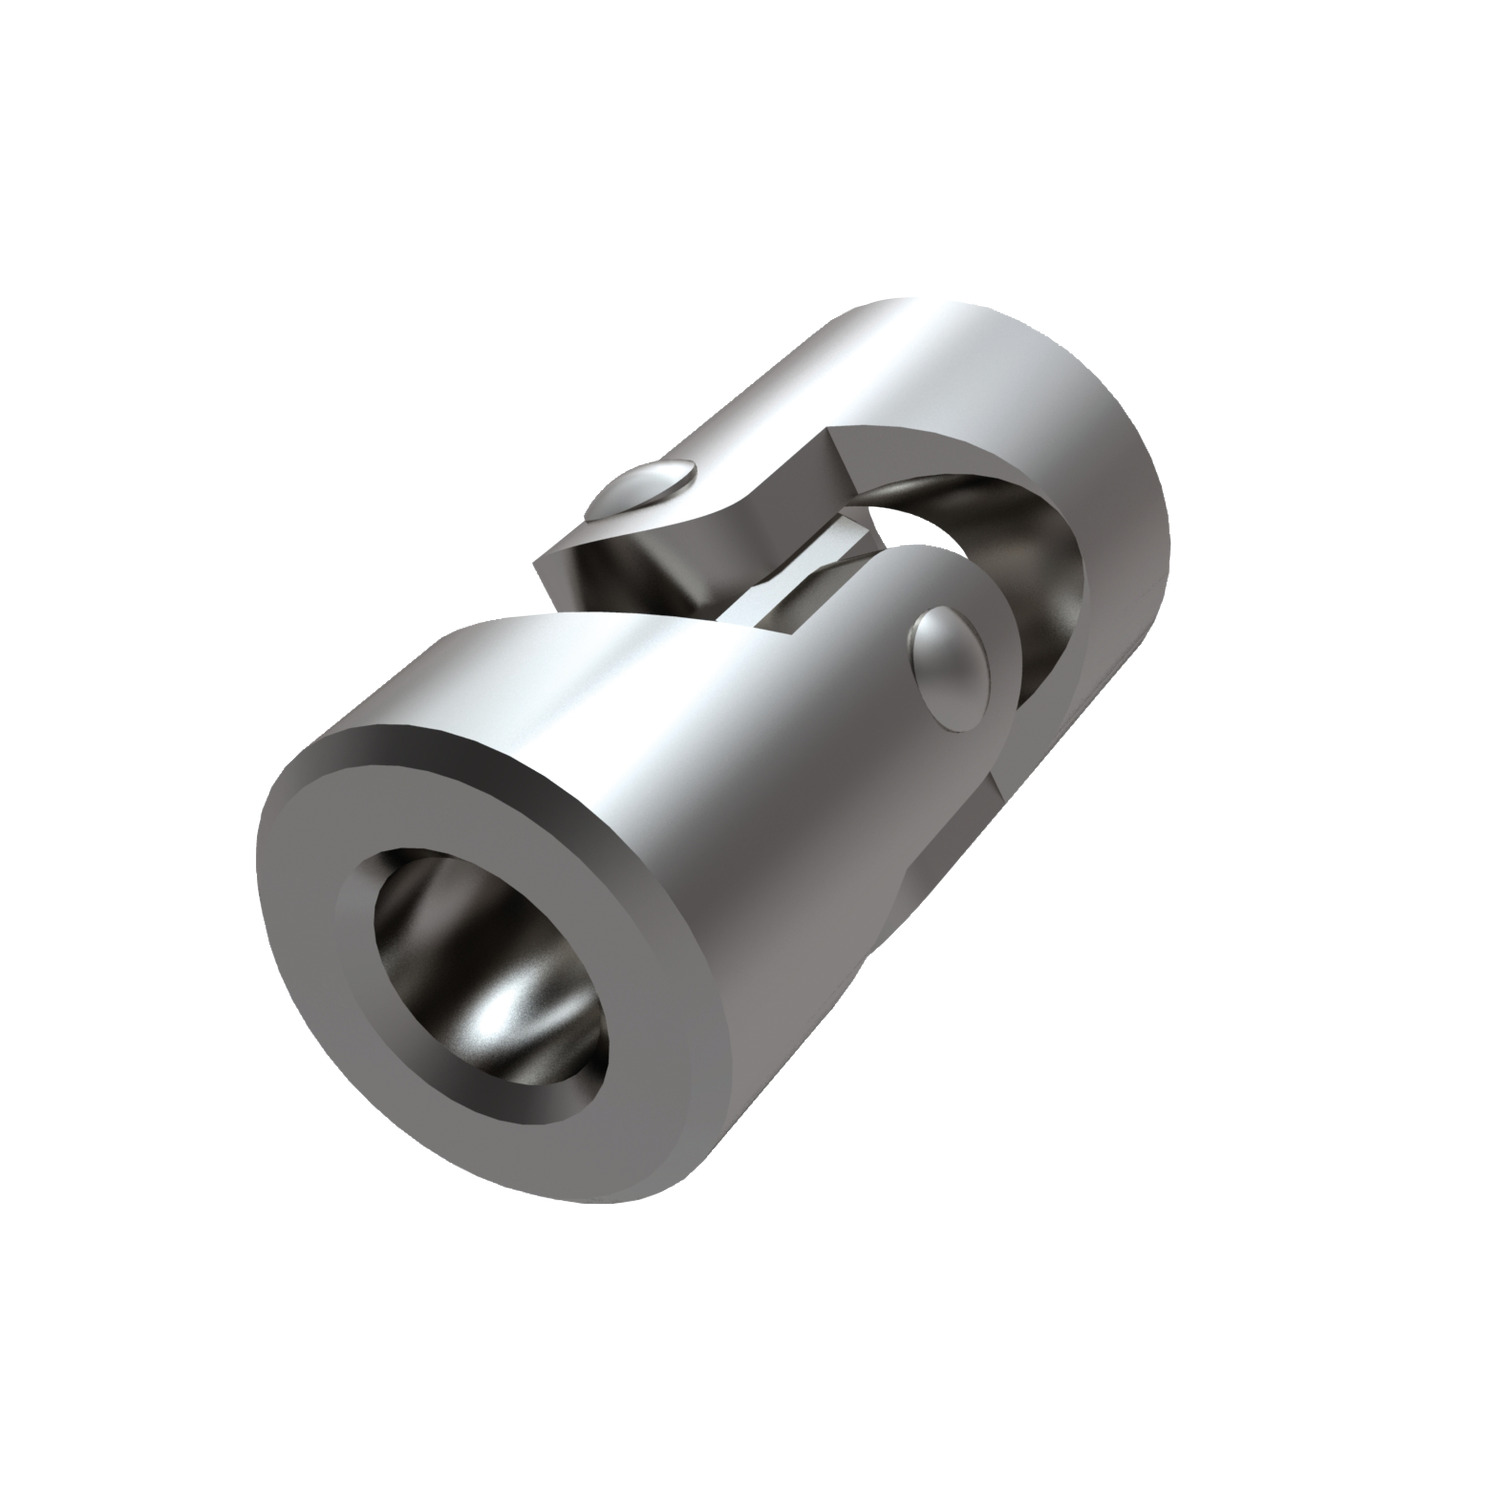 Stainless Single Universal Joint Stainless steel single universal joint. Manufactured to DIN 808. Maximum bending angle of 45° per joint. Round bore and keyway available.